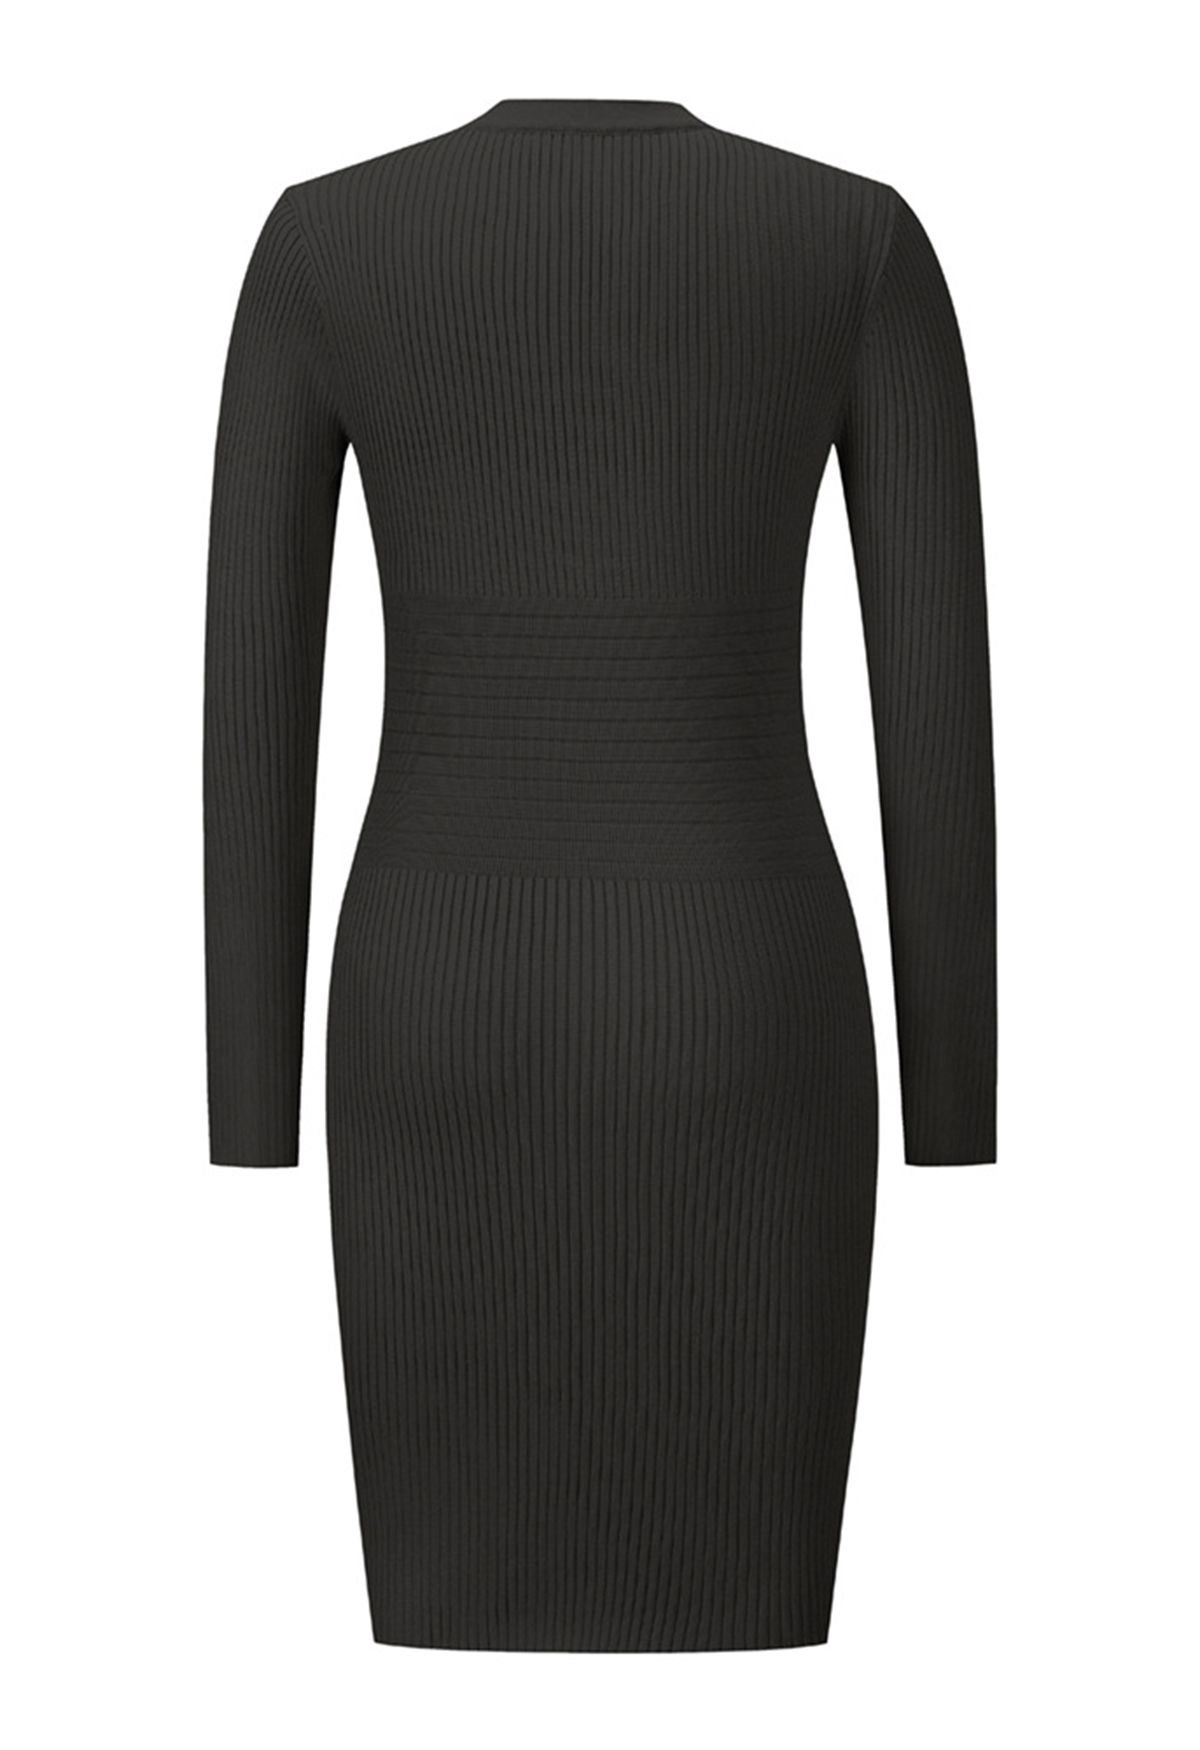 Decorous Gold Button Fitted Knit Dress in Black